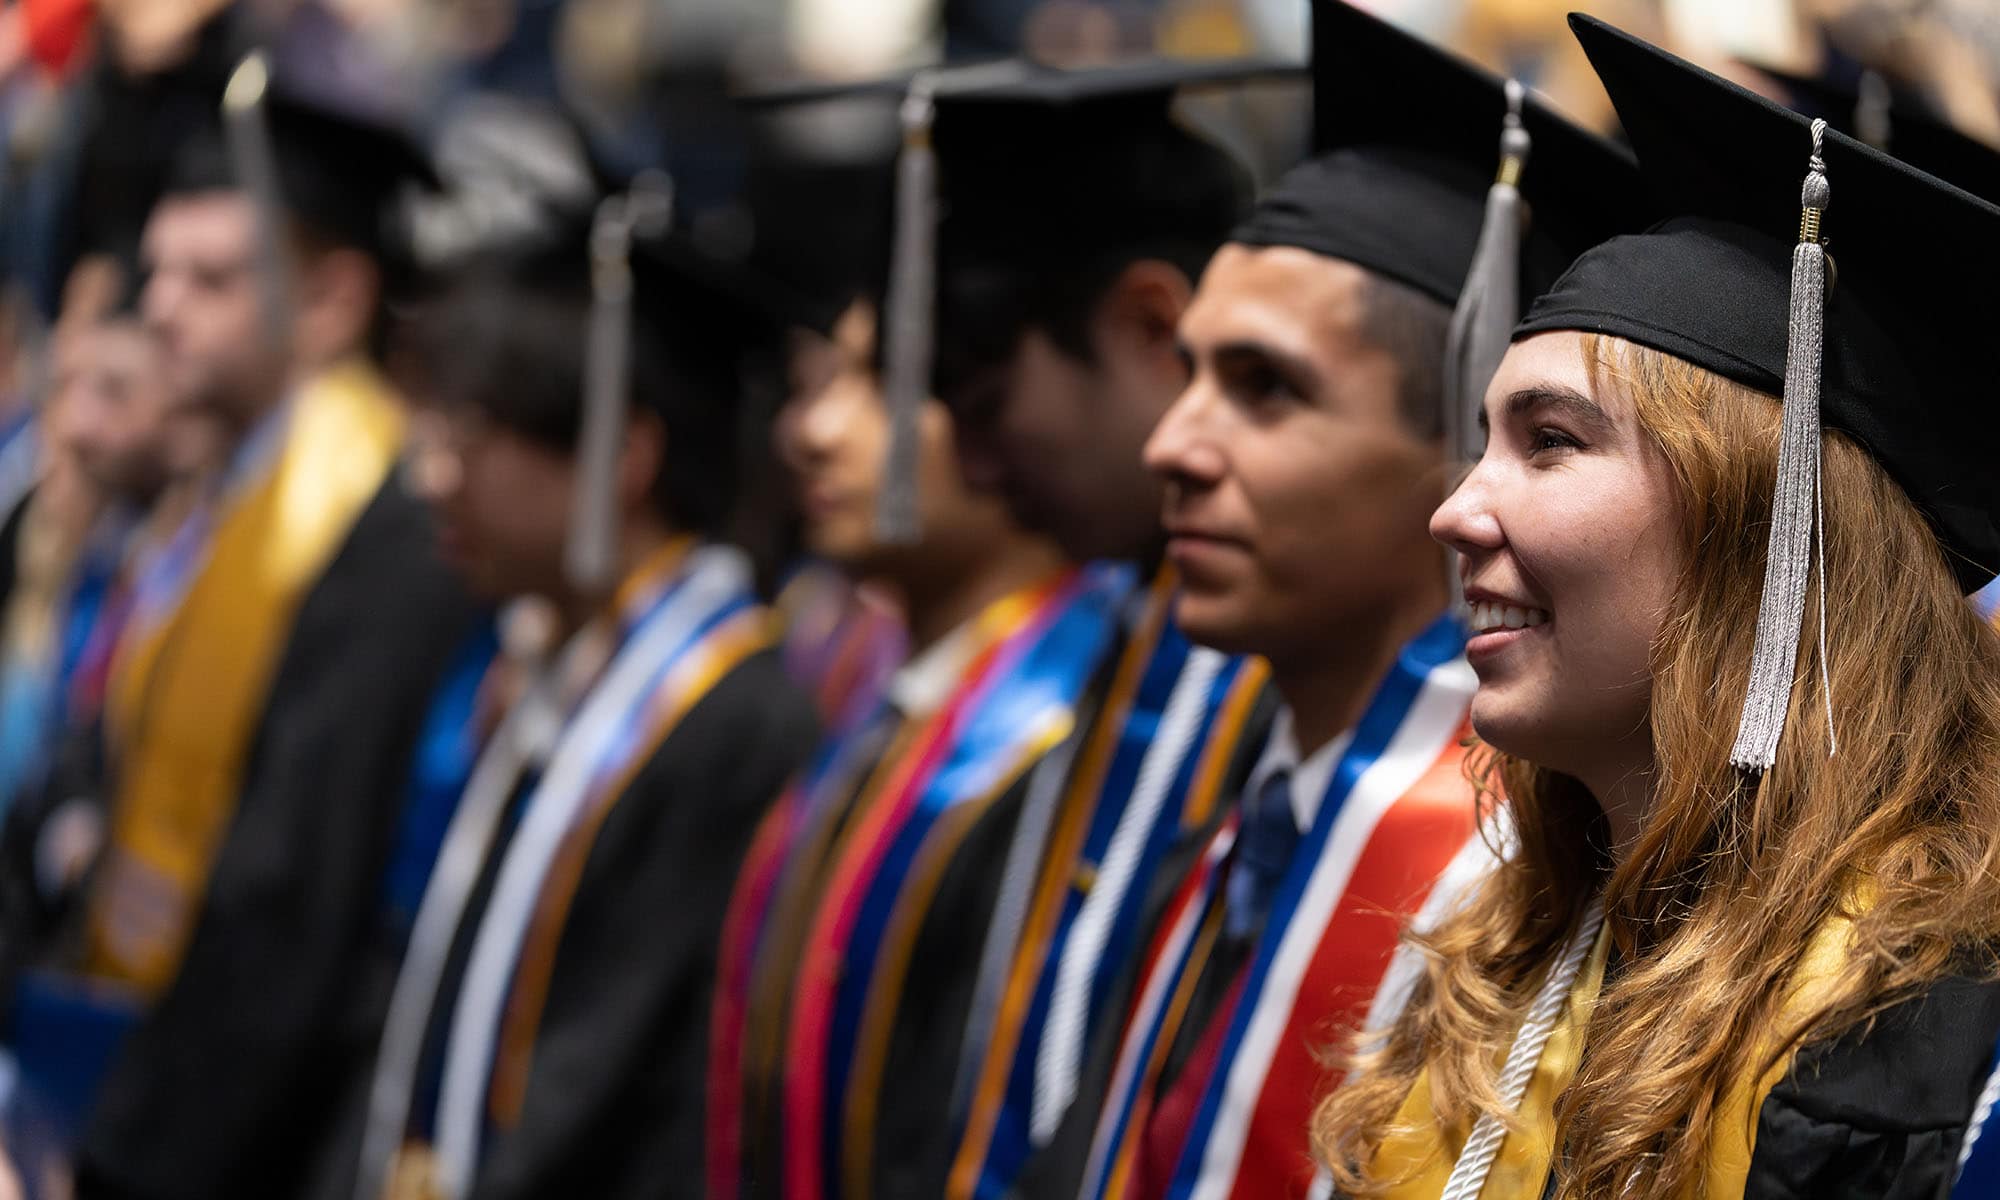 A line of smiling graduates wearing their caps, gowns, and various colors of sashes and cords.